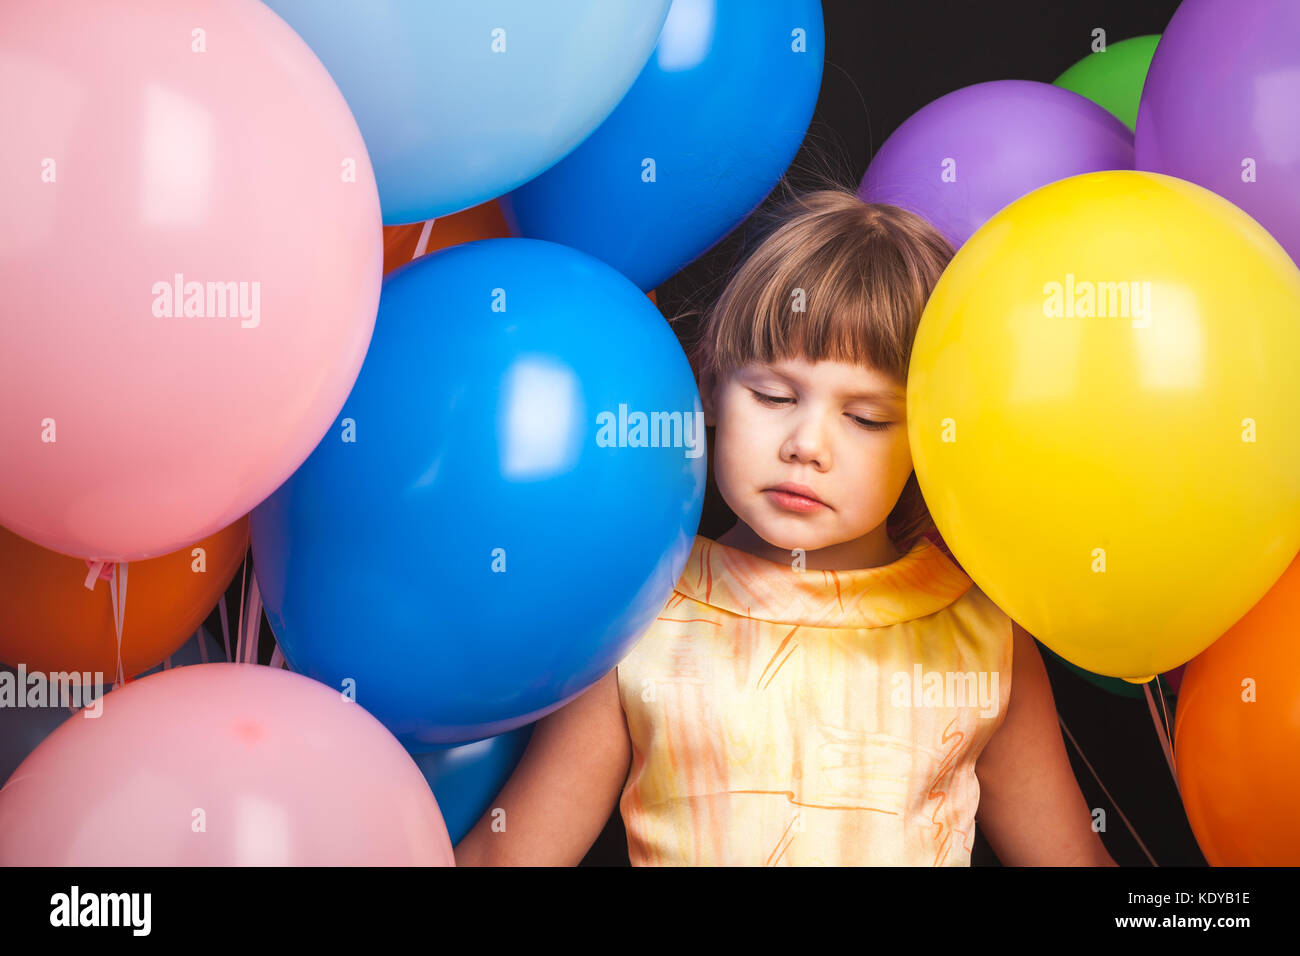 Portrait of sad Caucasian blond little girl with colorful balloons over black background Stock Photo